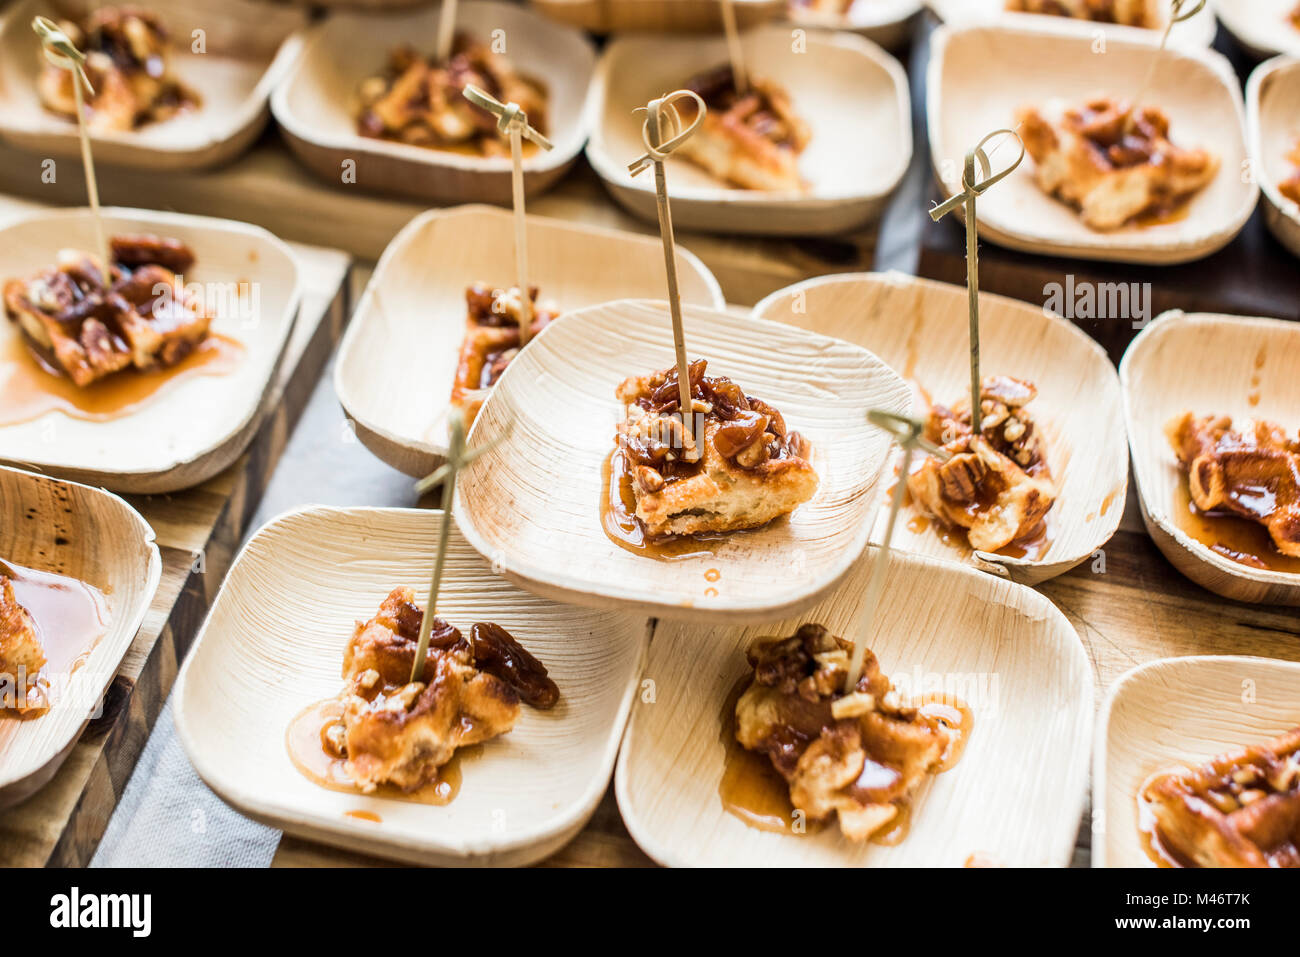 Pecan maple waffles at Brunchcon event. Stock Photo